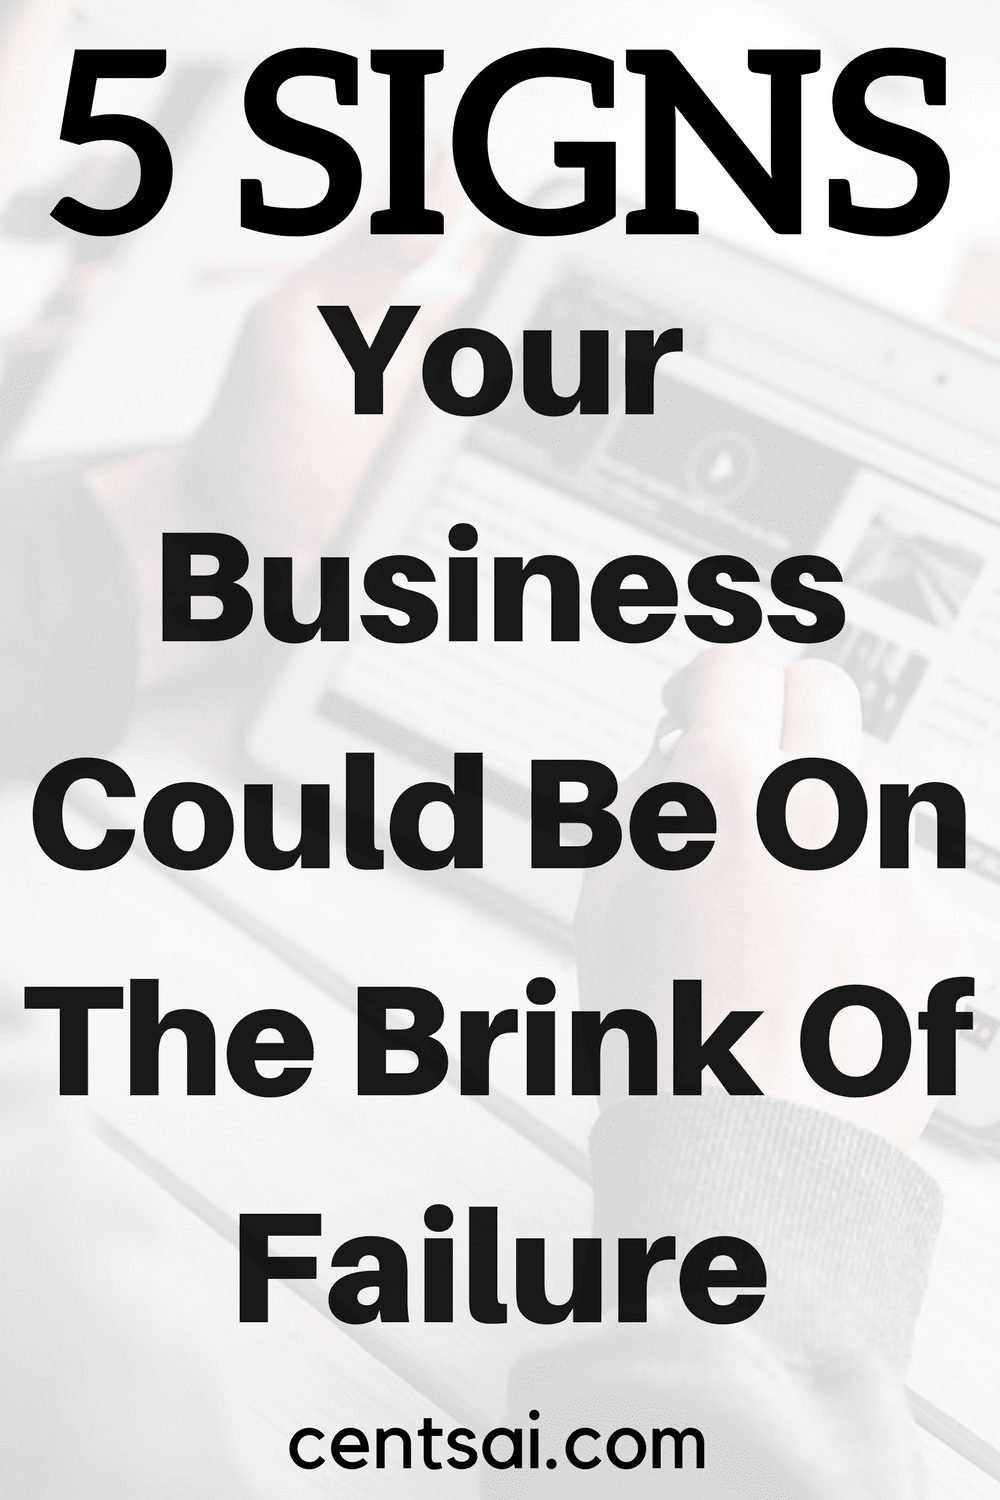 5 Signs Your Business Could Be On The Brink Of Failure. Owning a Laundromat isn't easy, and if you're not careful, it's easy to miss - or ignore - fatal mistakes out of sheer stubbornness.